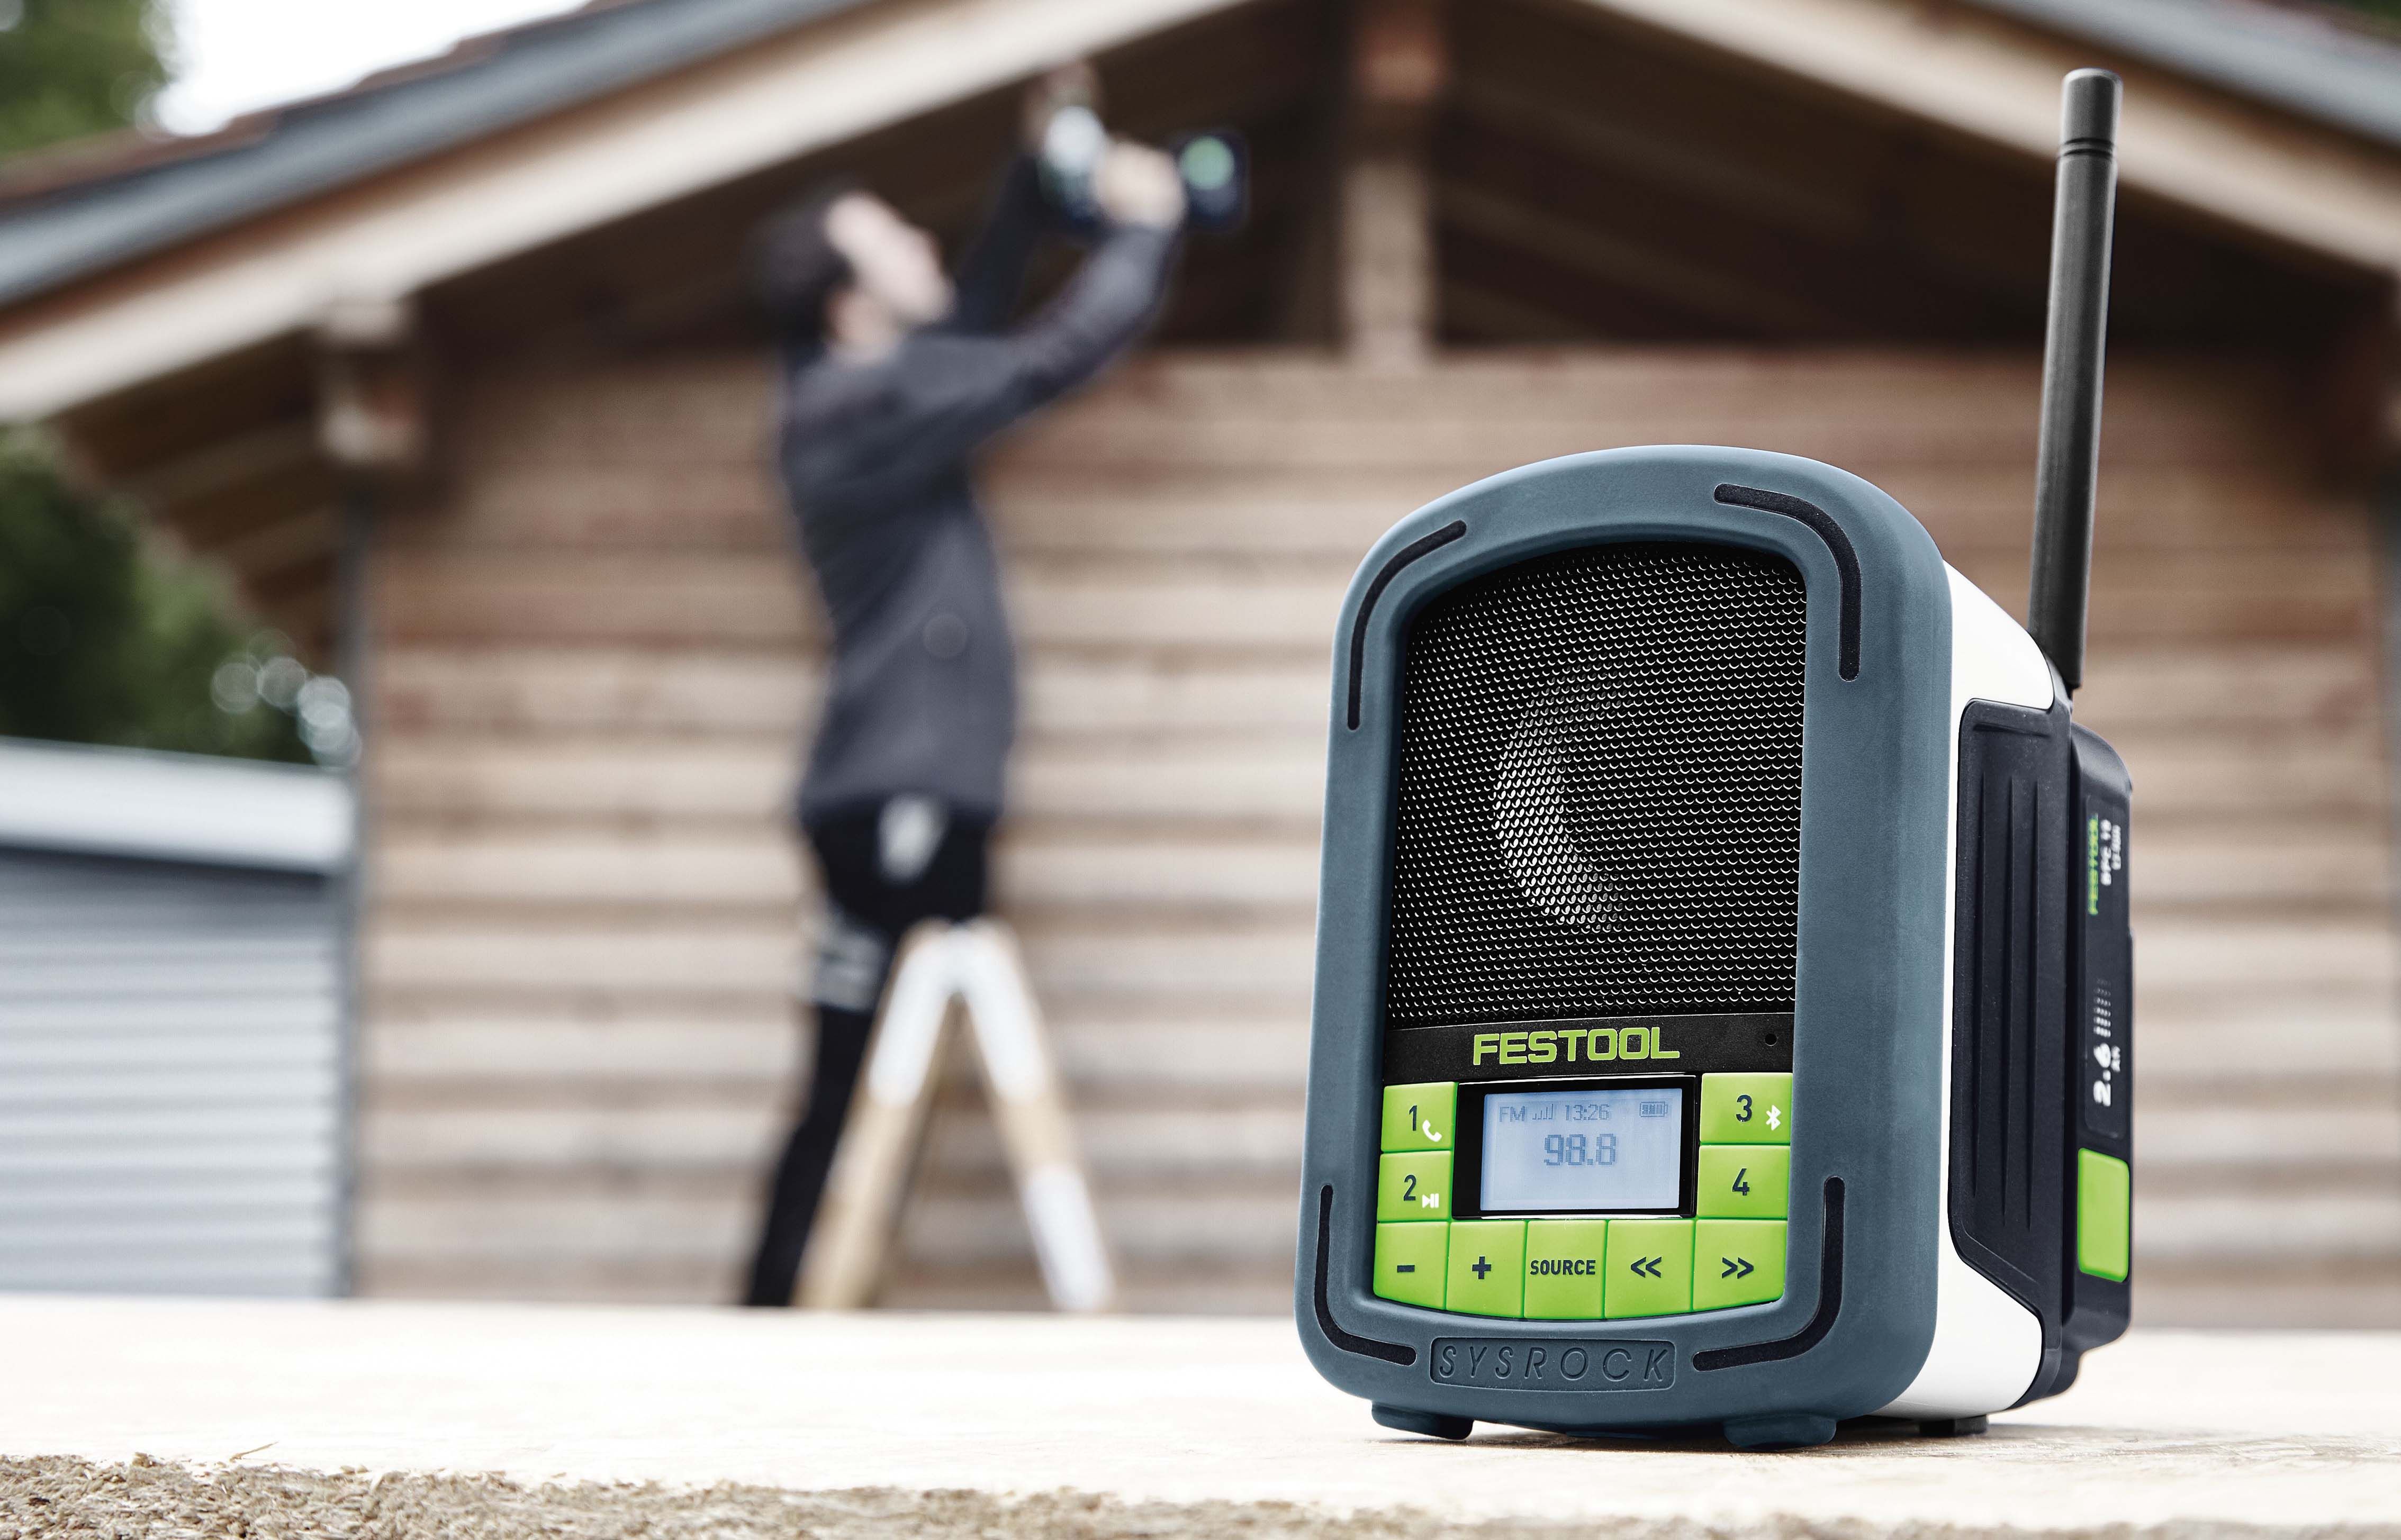 SYSRock Worksite Radio Bare (Tool Only) SYSROCKBR10 200186 by Festool